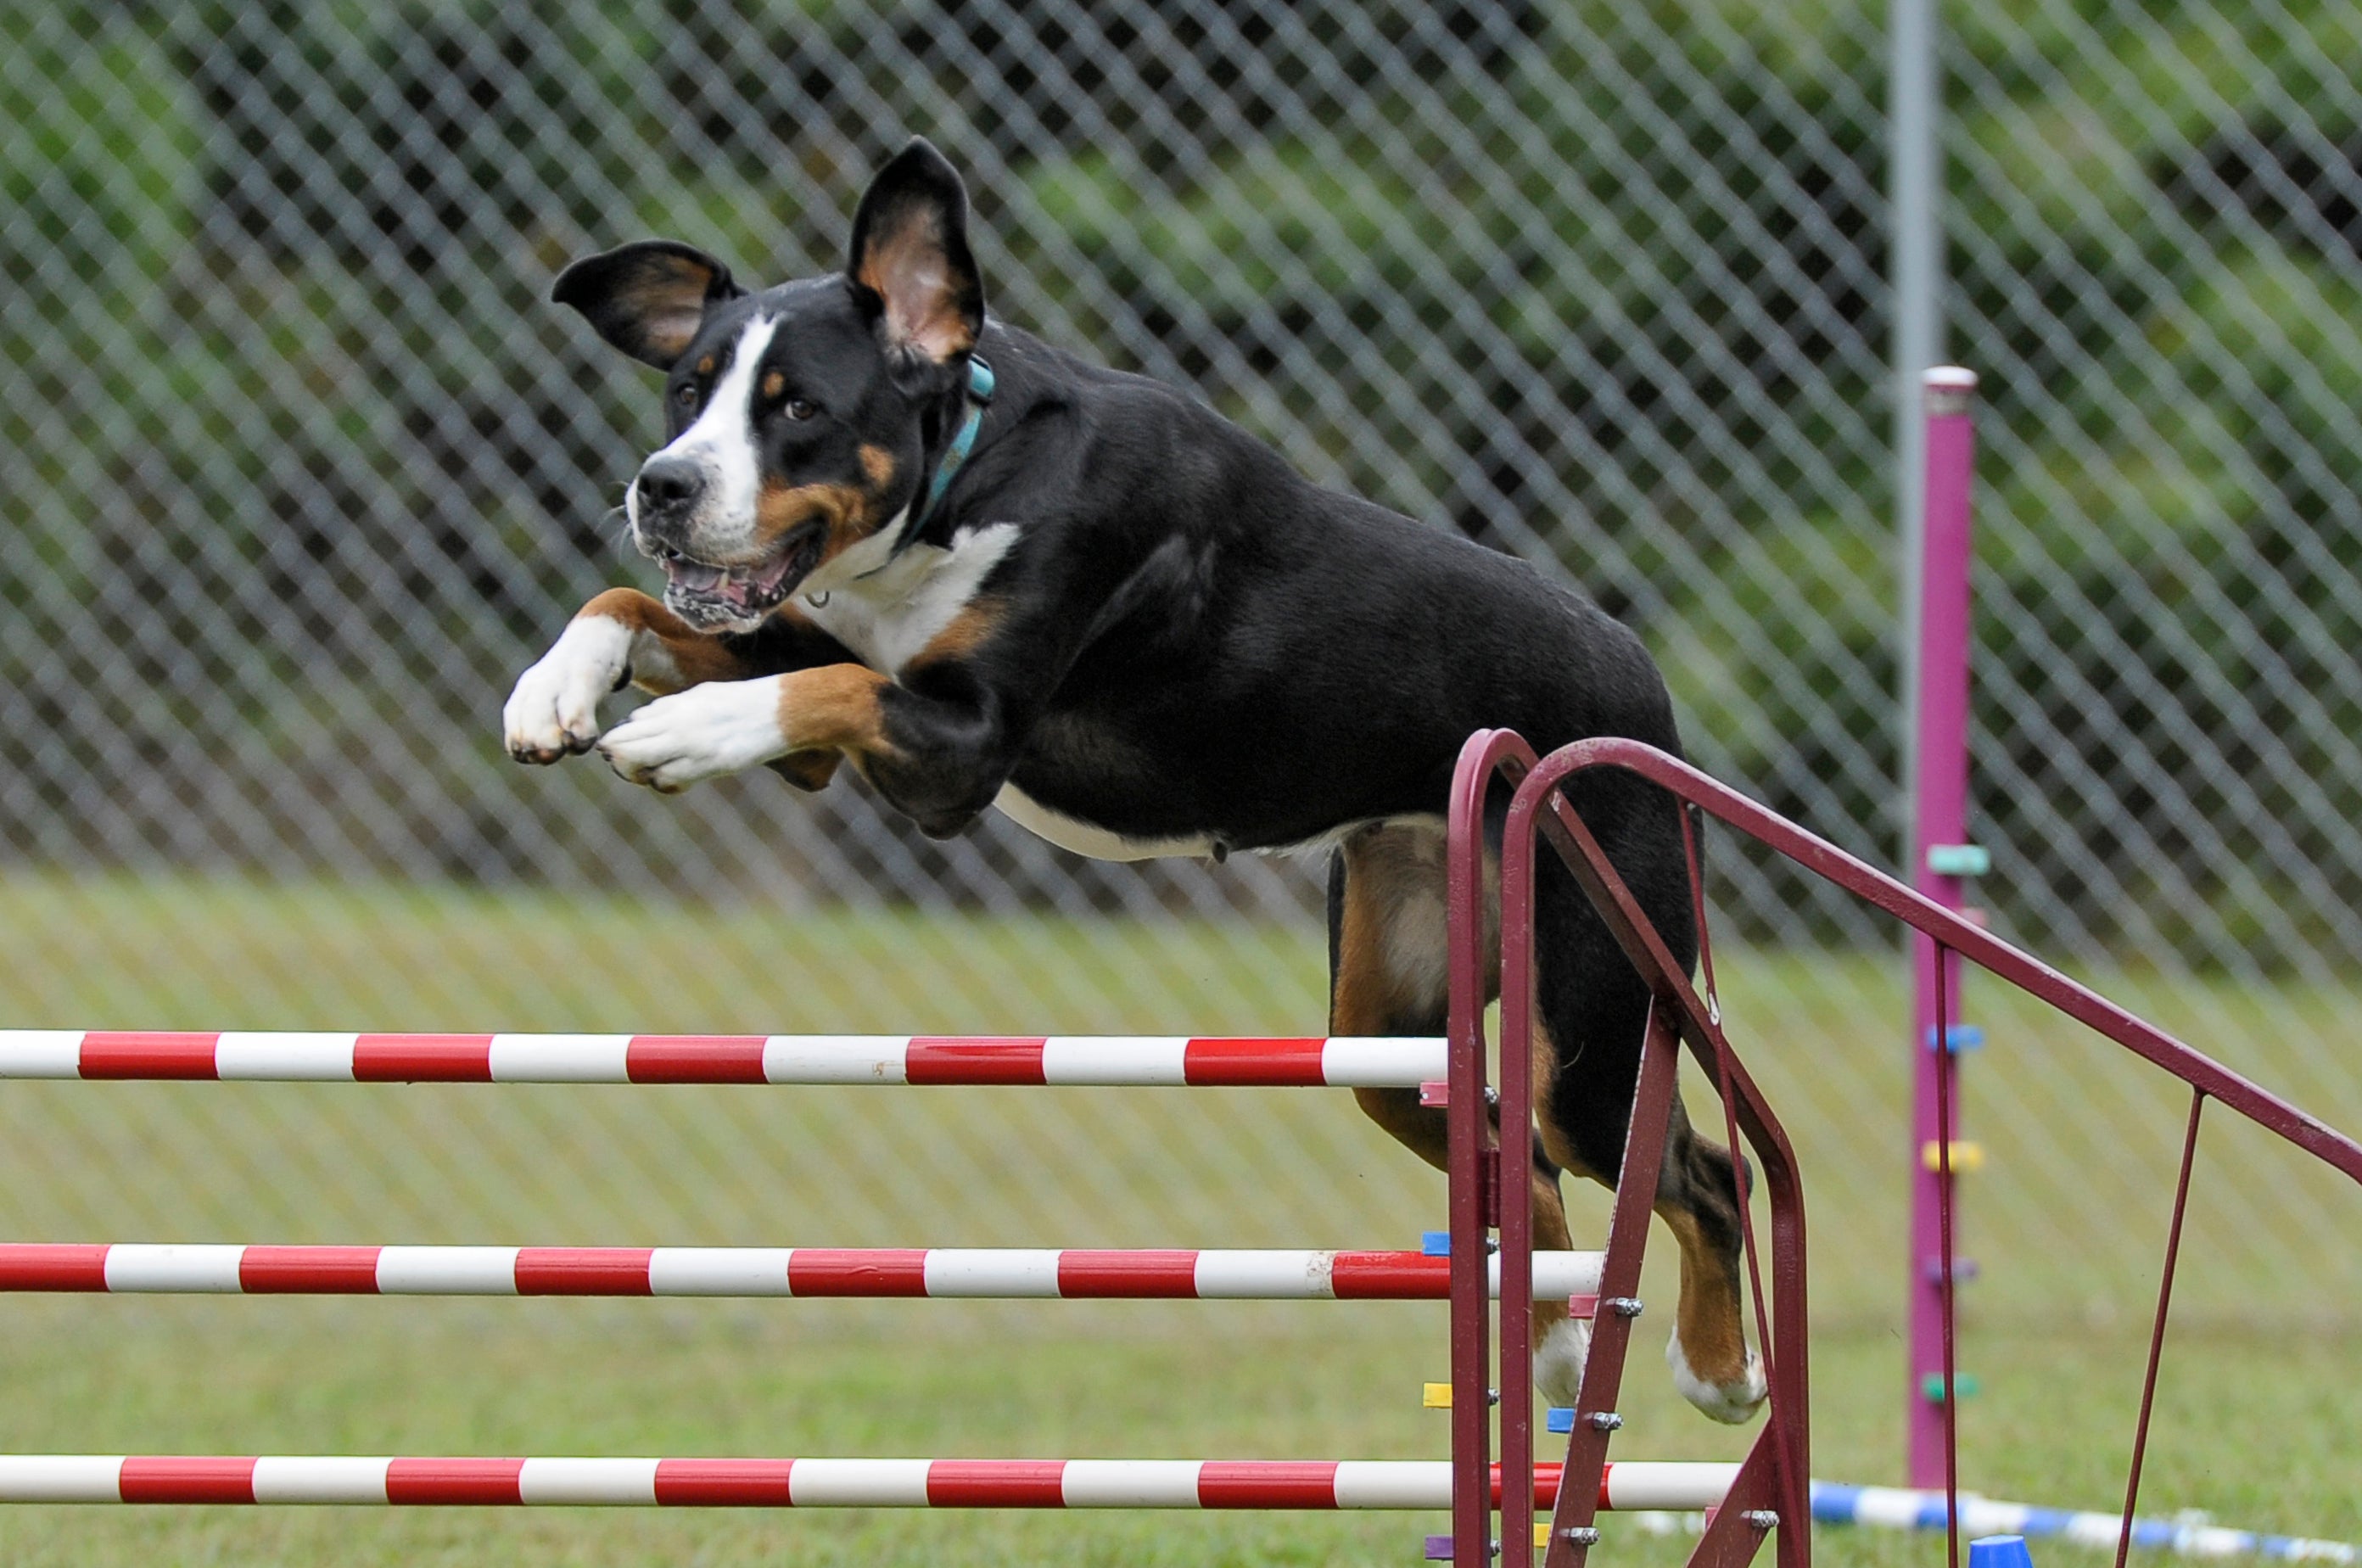 Backyard Fun: How to Create Your Own Dog Agility Course